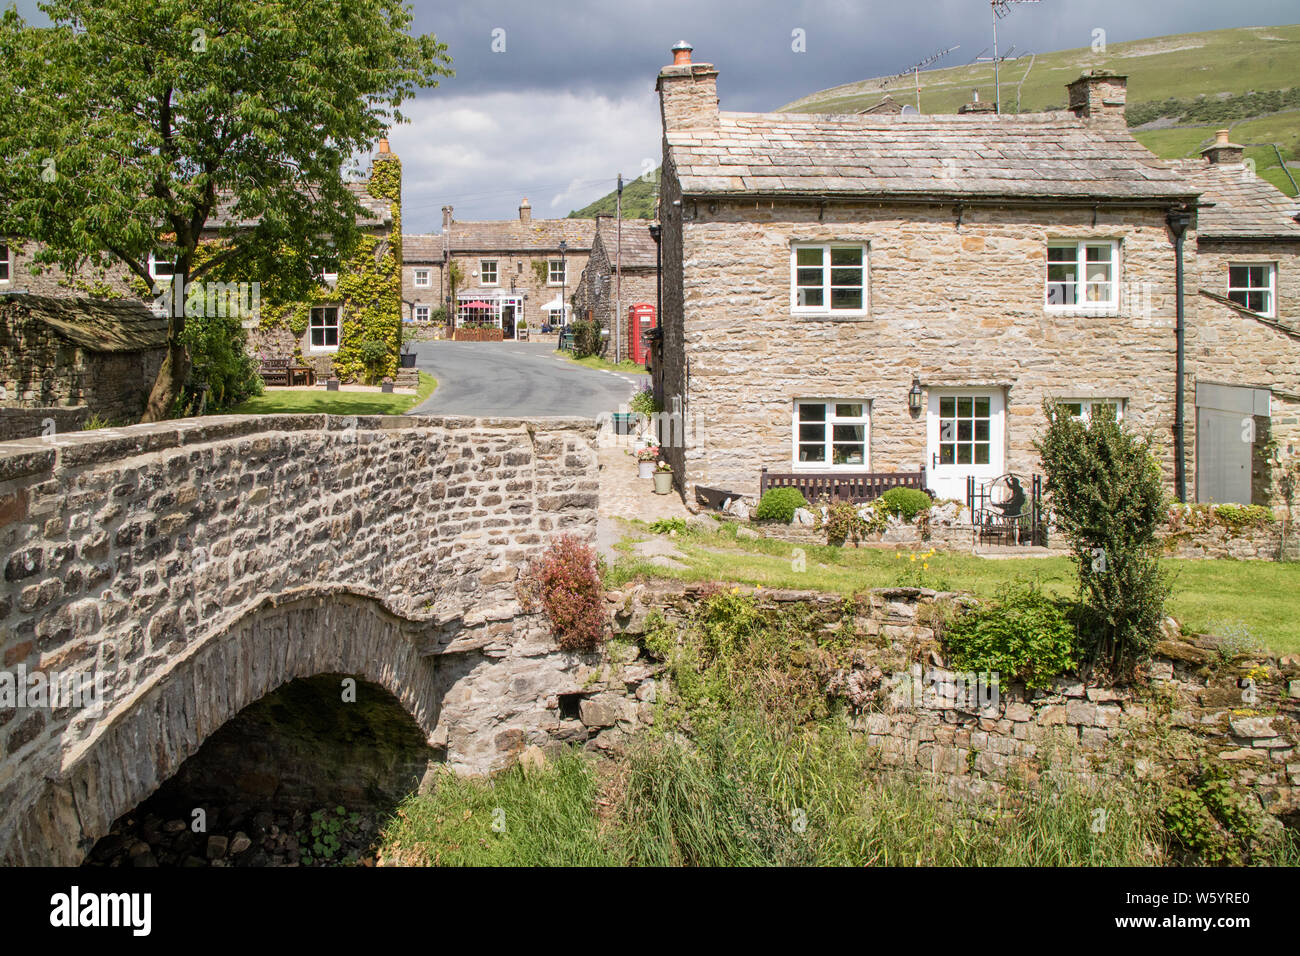 Thwaite is a small village in Swaledale, Richmondshire, Yorkshire Dales National Park, North Yorkshire, England, UK Stock Photo